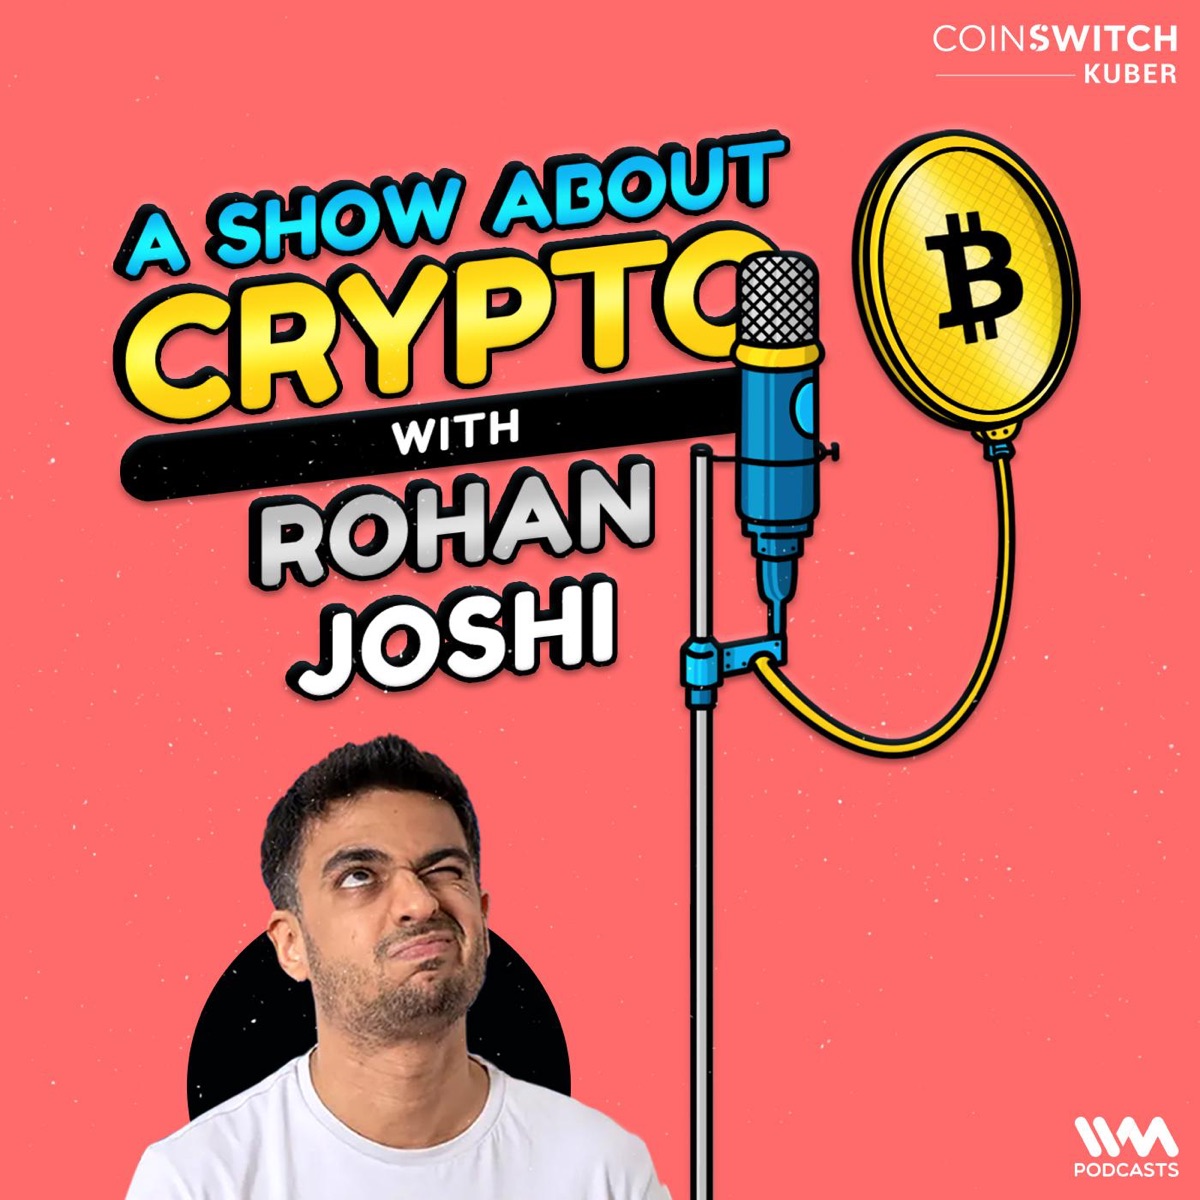 A Show About Crypto with Rohan Joshi